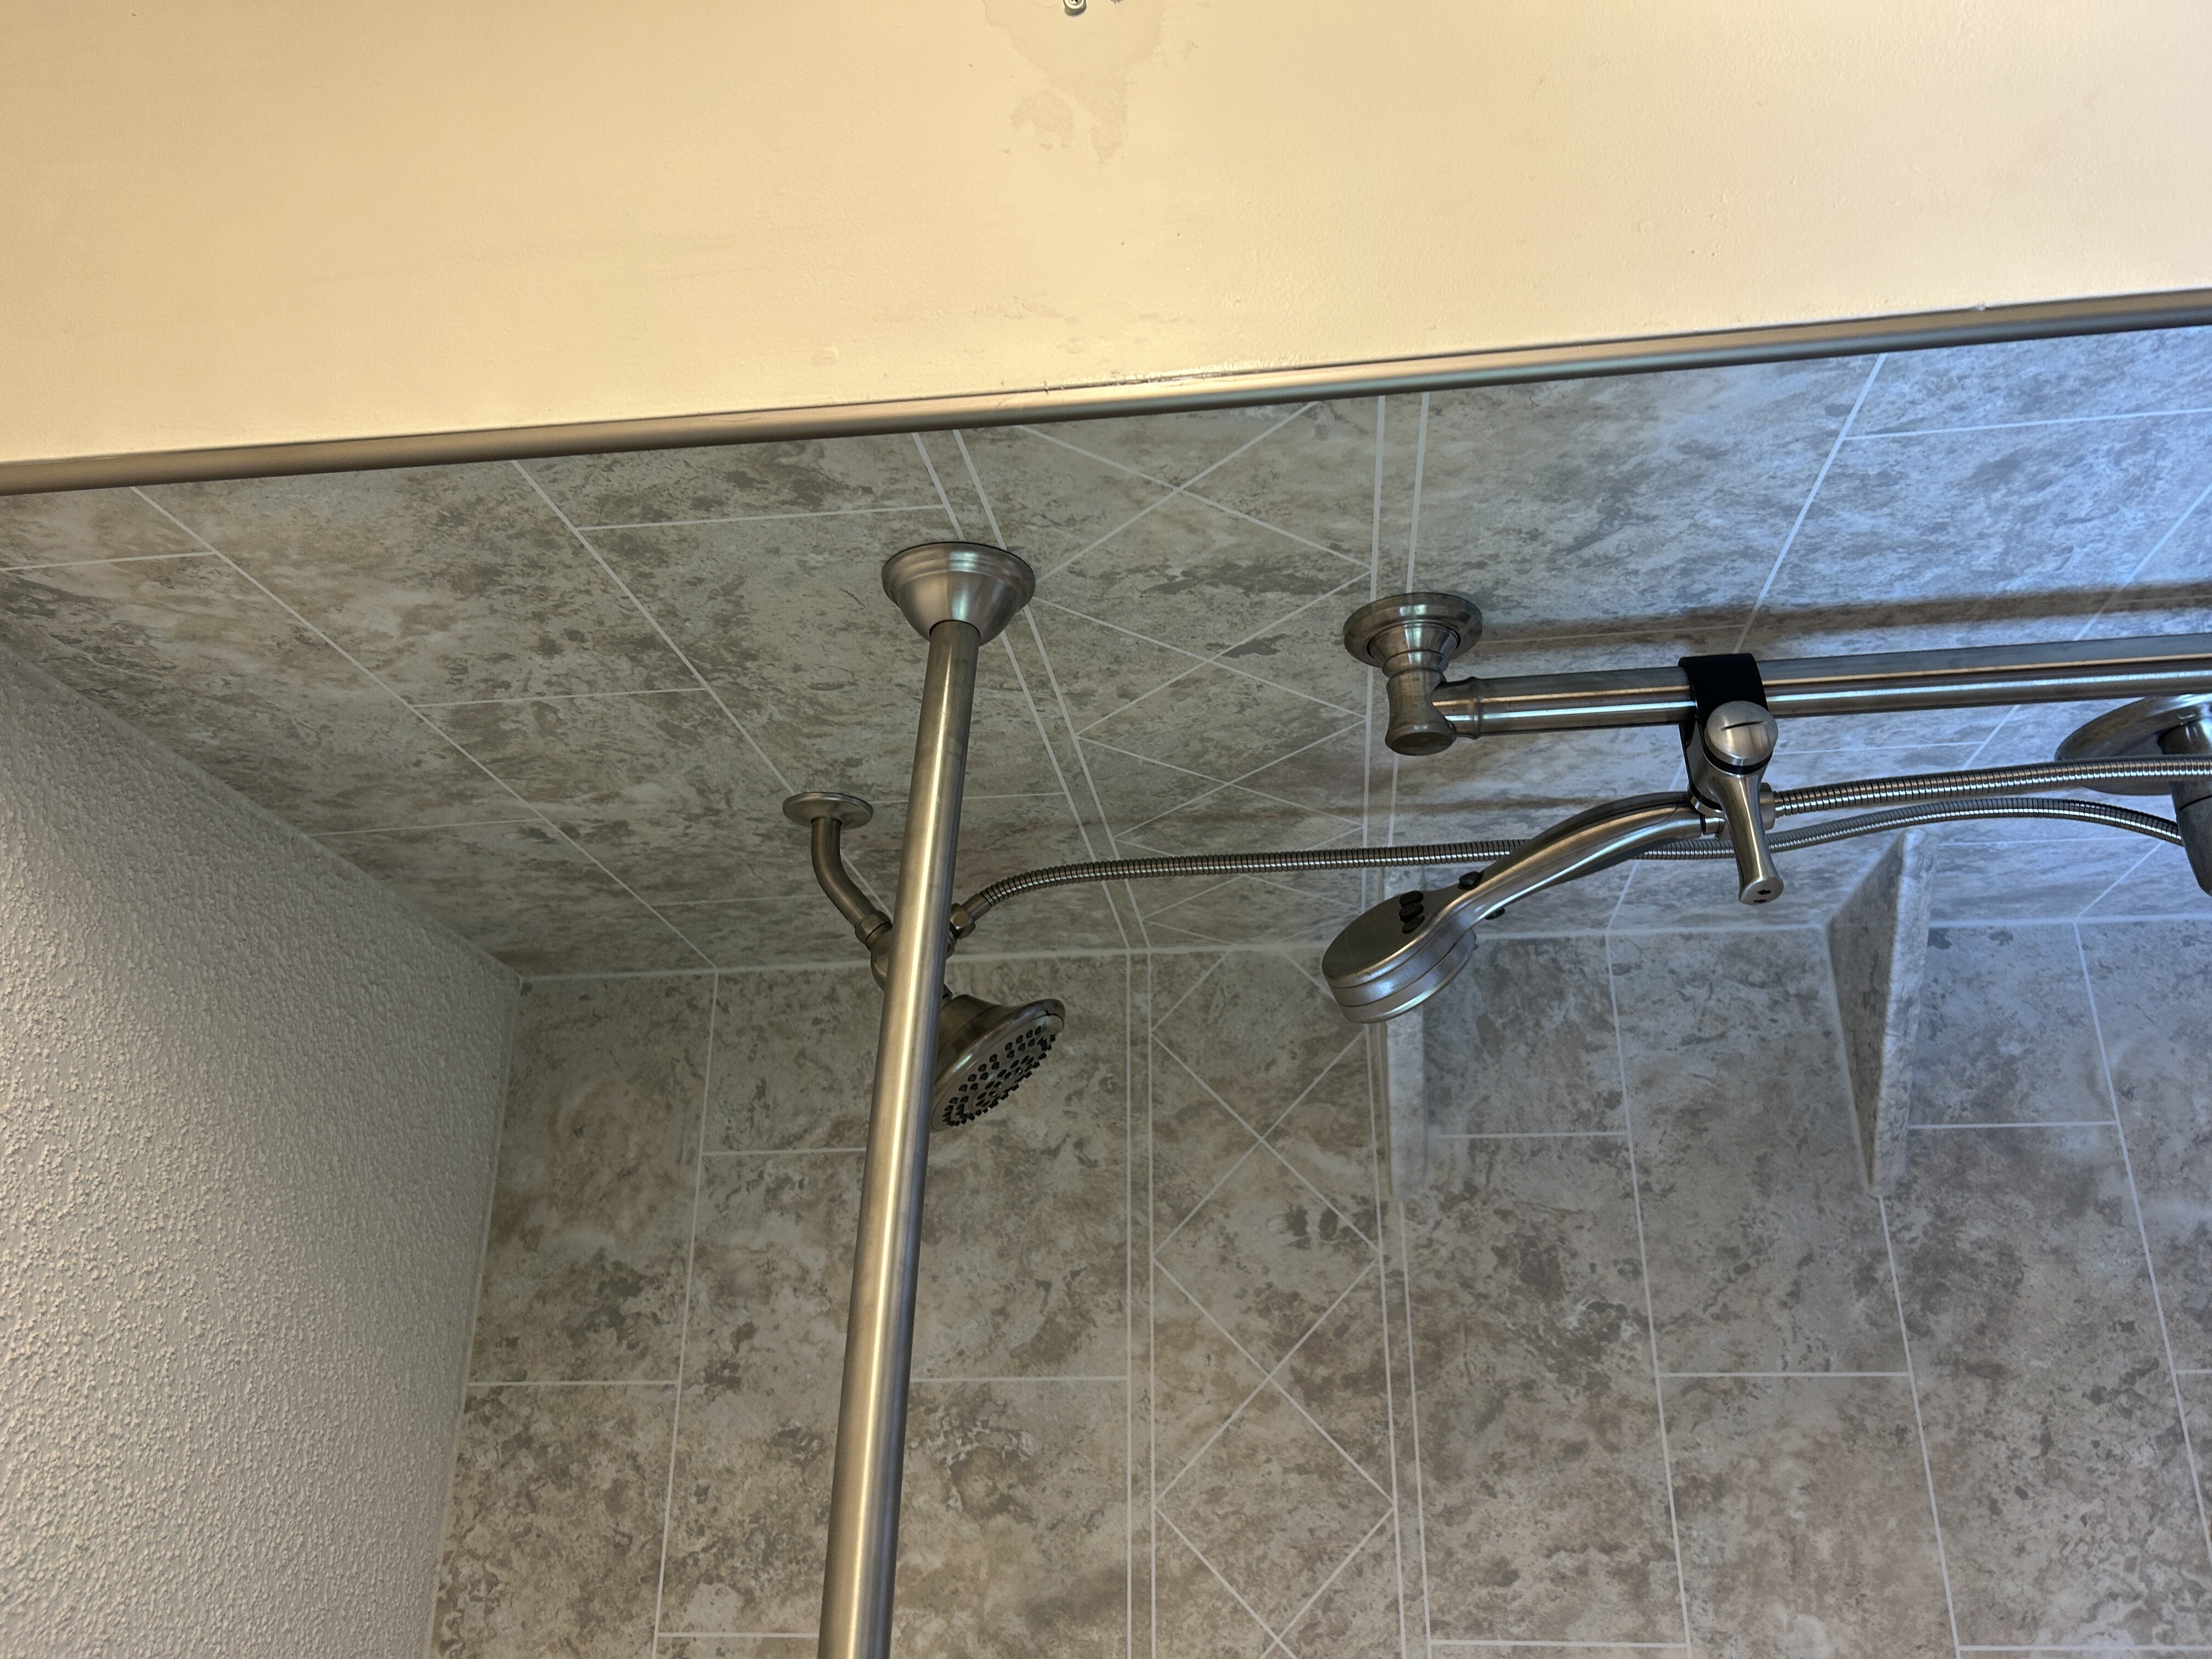 Shower head and curtain rod